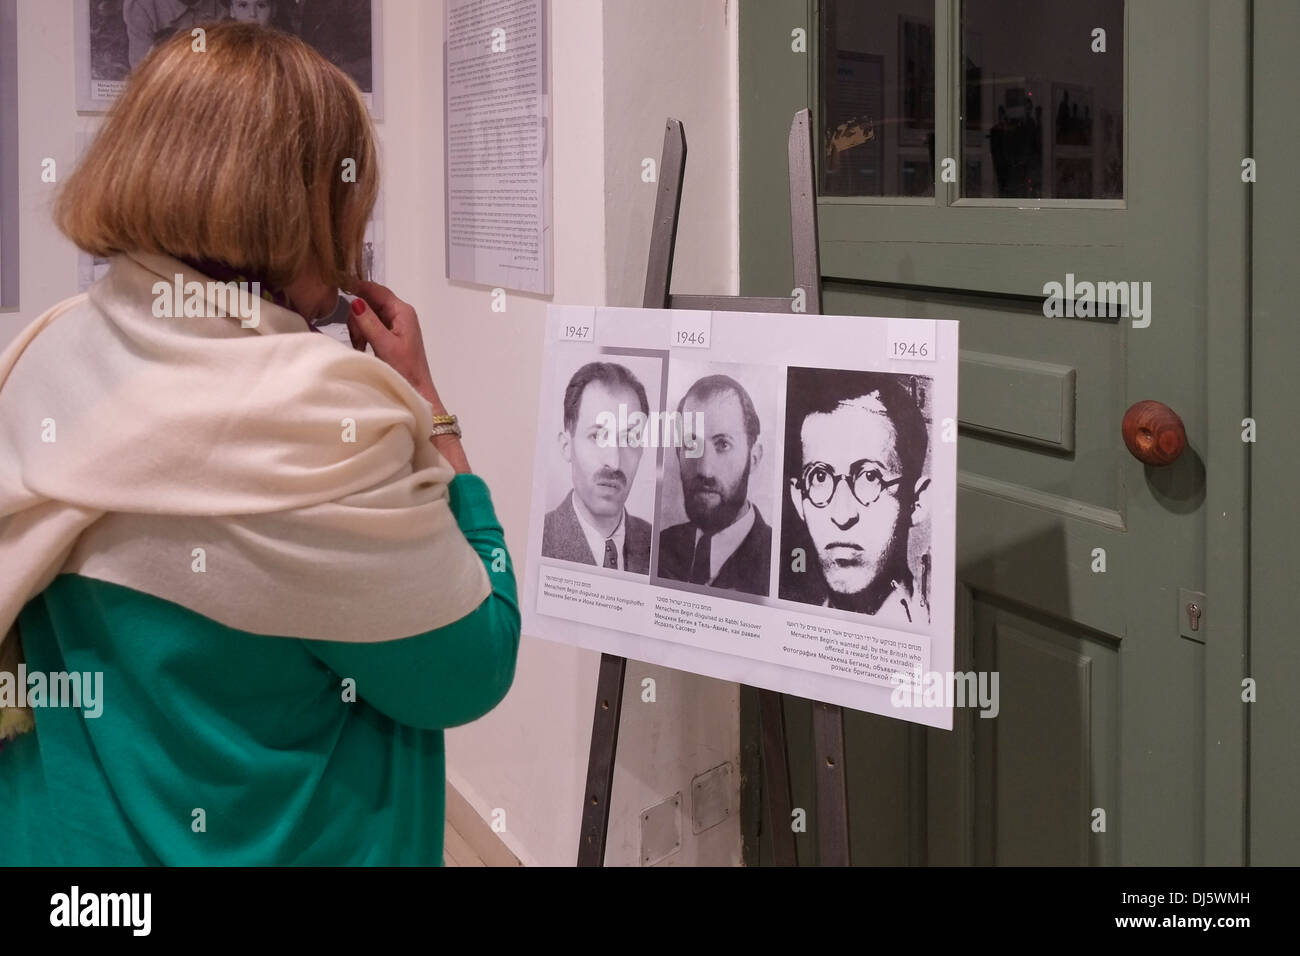 A woman view old photographs of former Israeli prime minister Menachem Begin in a gallery in West Jerusalem Israel Stock Photo